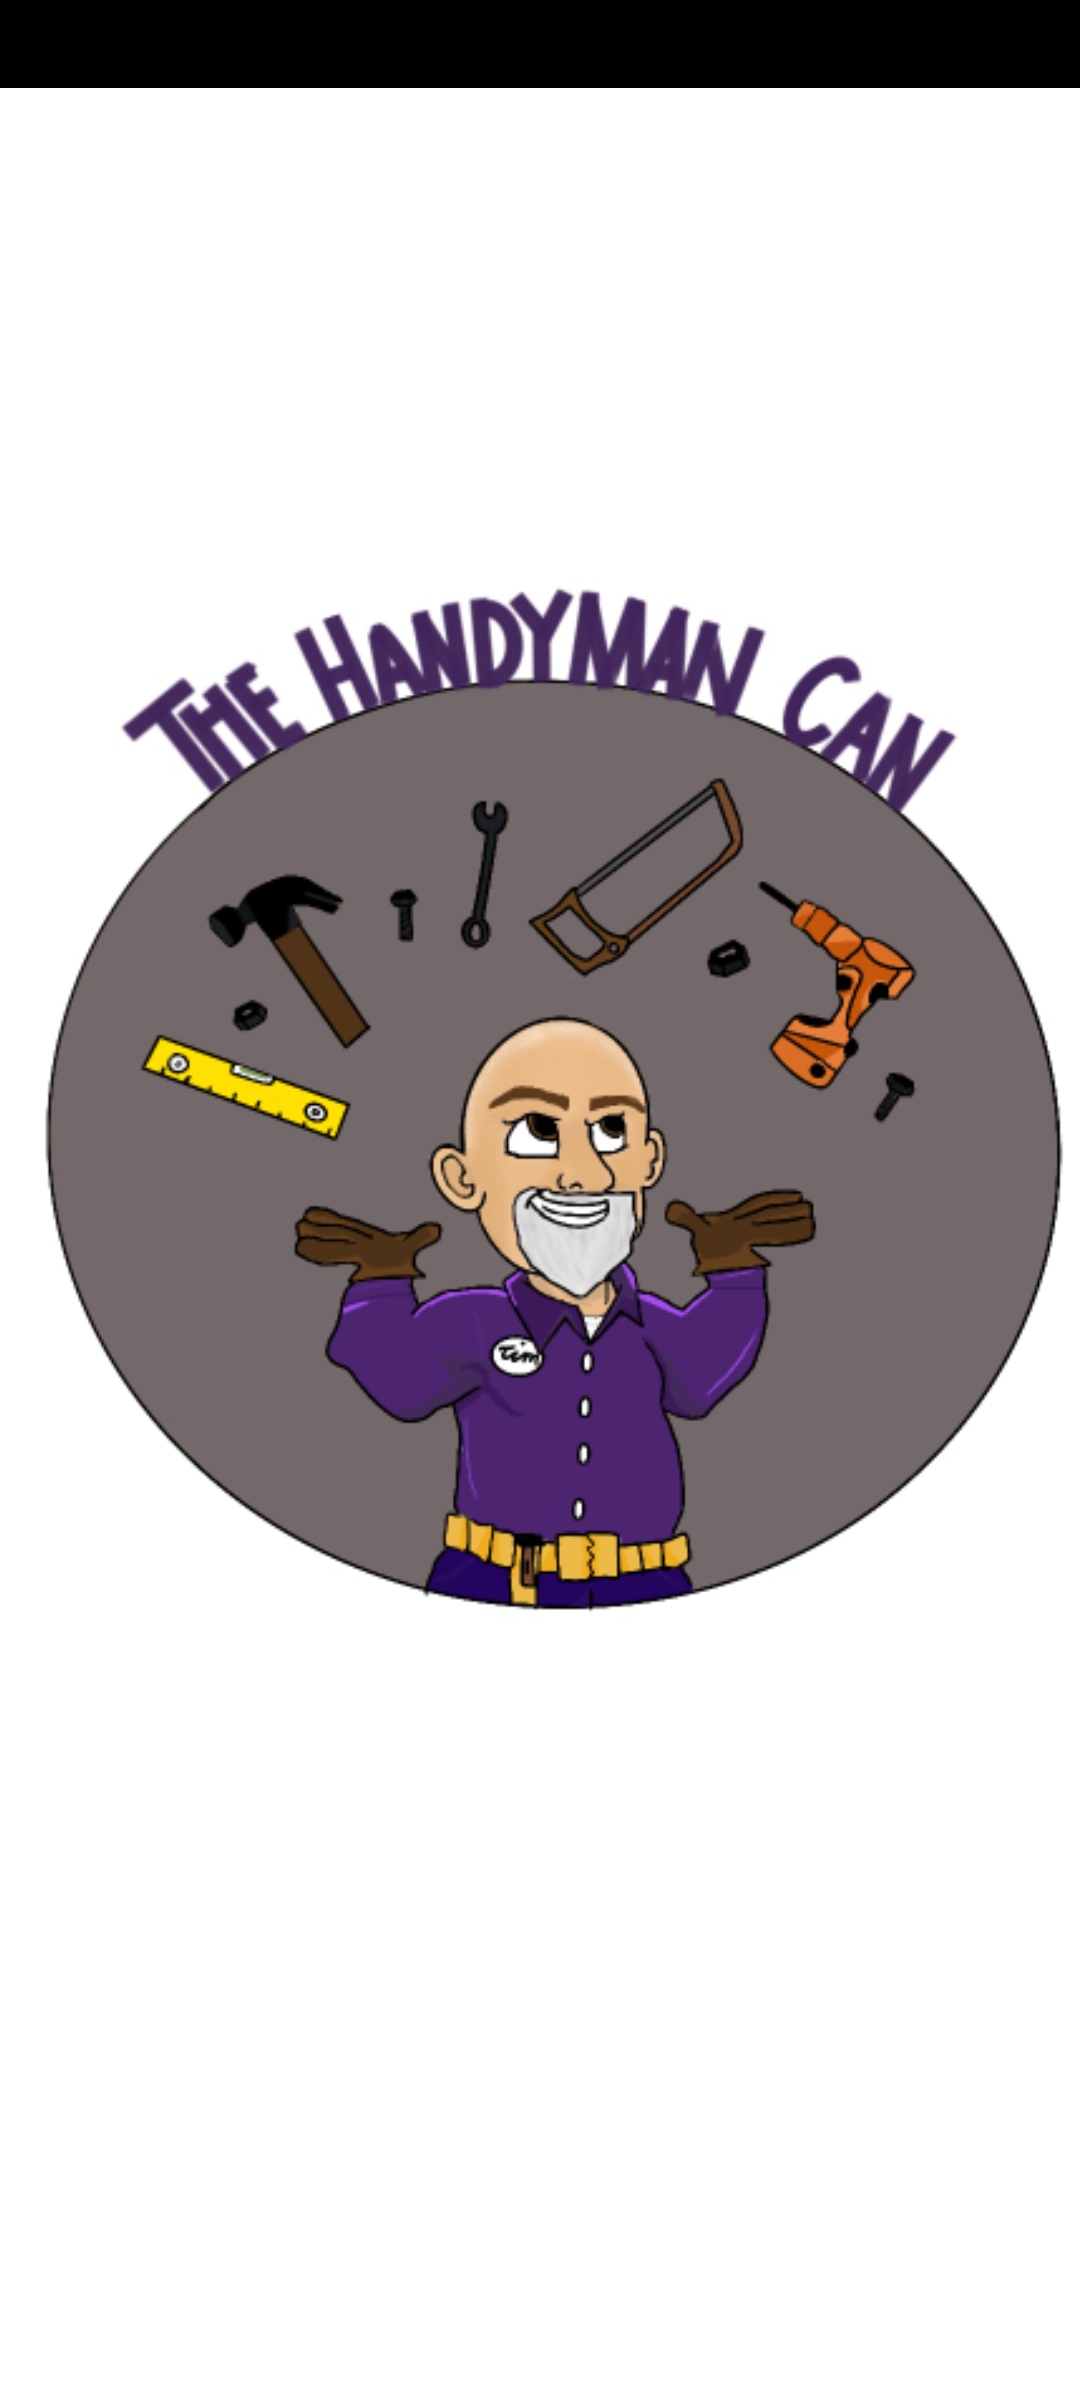 The Handyman Can - Unlicensed Contractor Logo